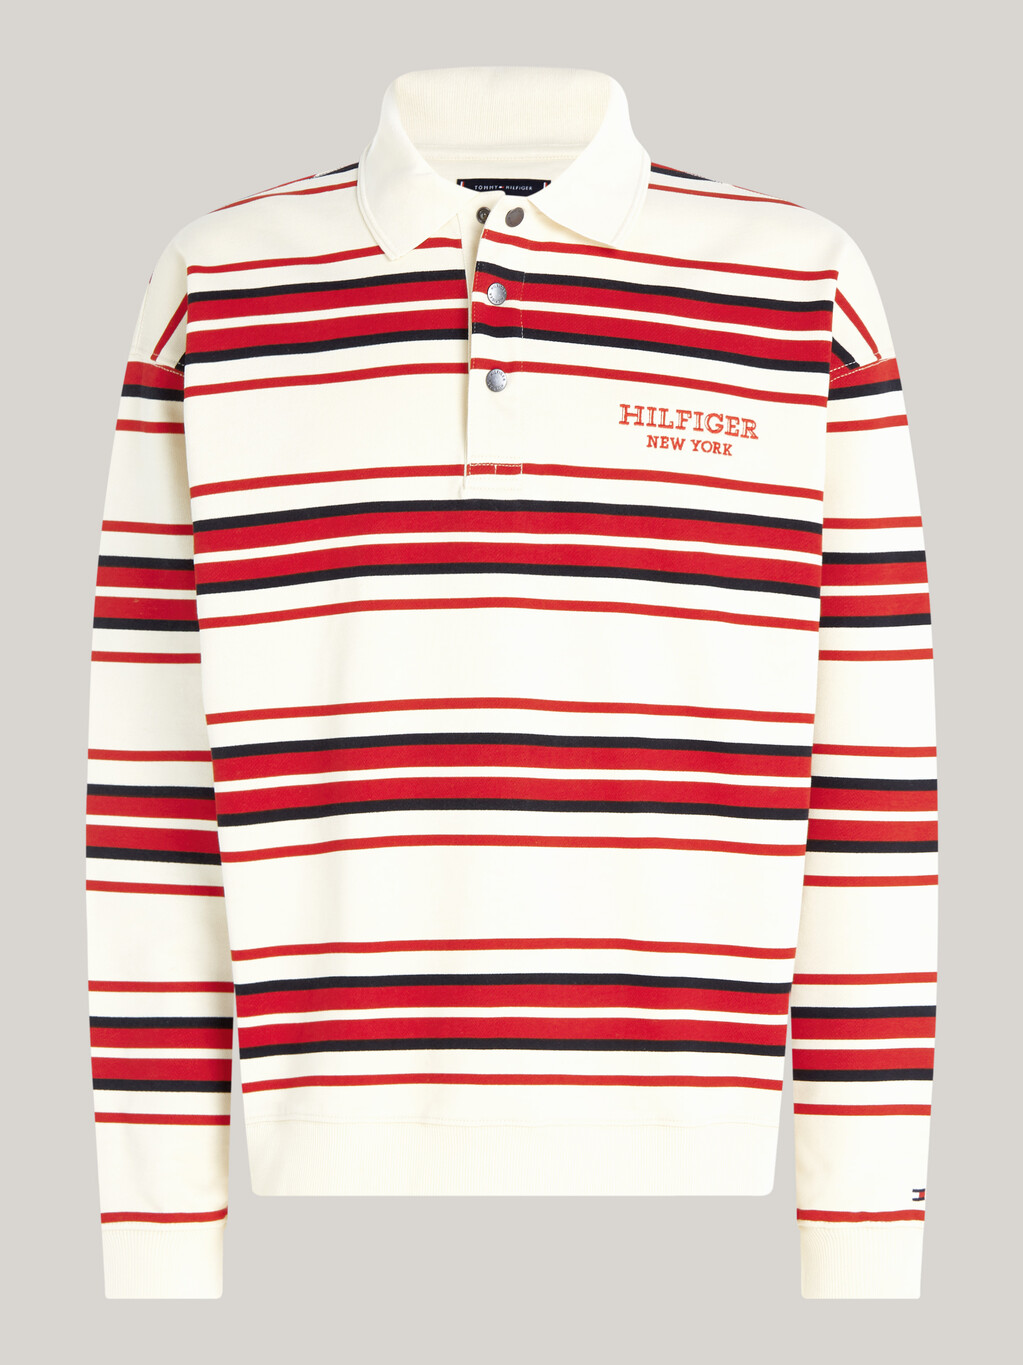 Hilfiger Monotype Stripe Regular Rugby Polo, Calico/Multi, hi-res